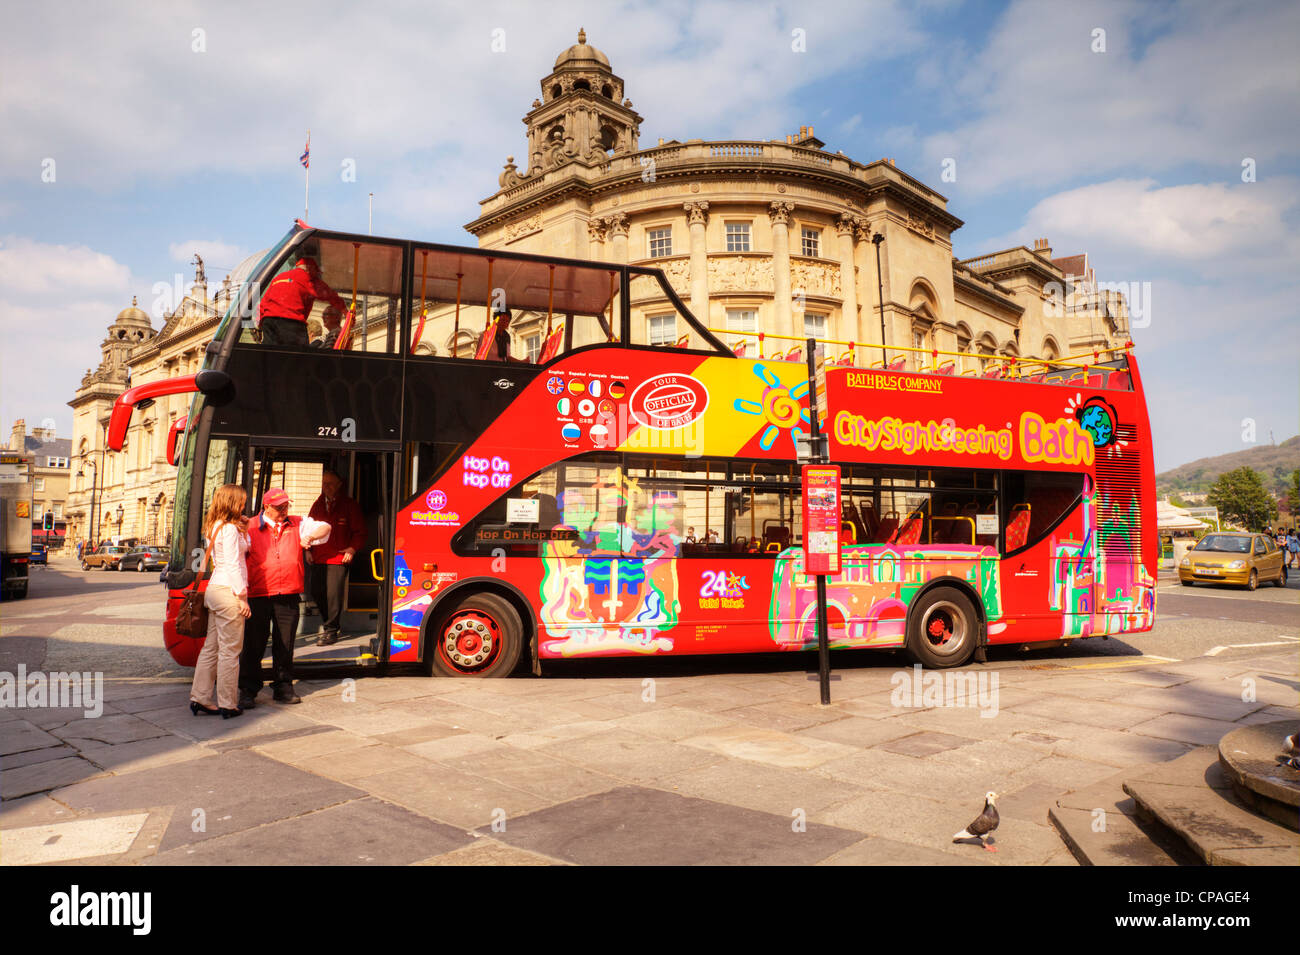 City Sightseeing tour bus in the city of Bath, Somerset, England Stock Photo